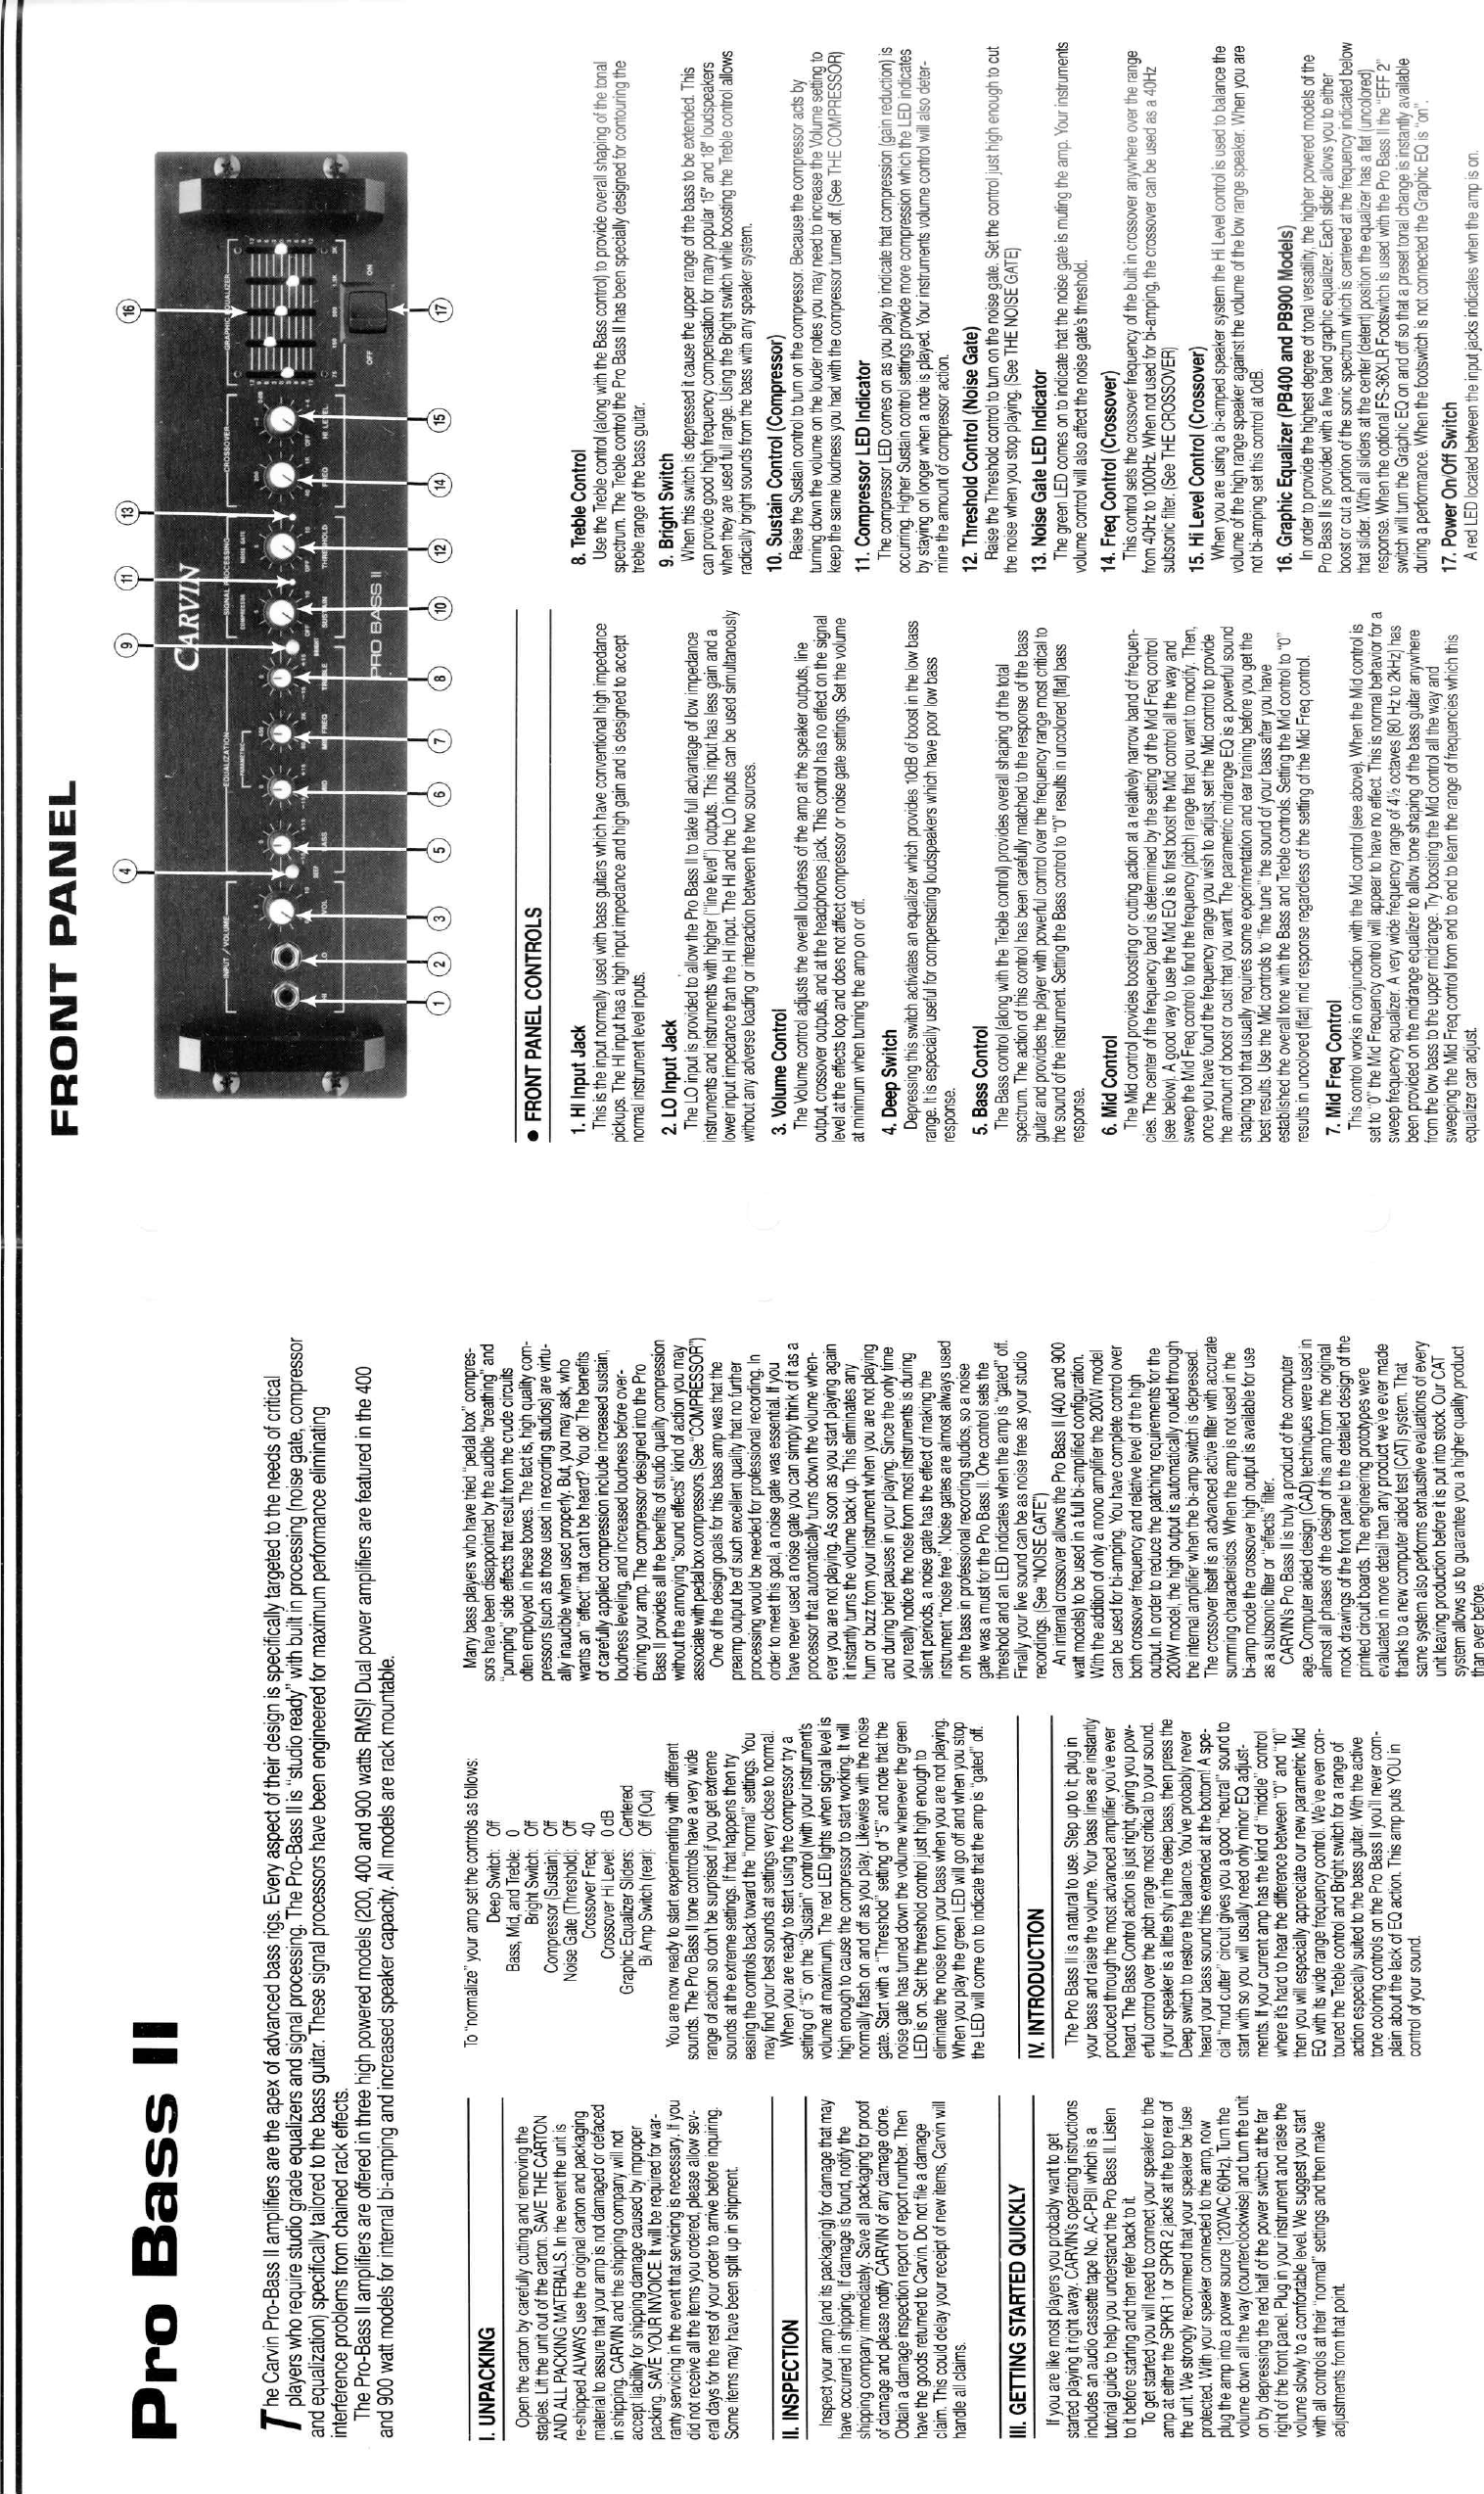 Page 2 of 4 - Carvin Carvin-Pro-Bass-Ii-Owners-Manual